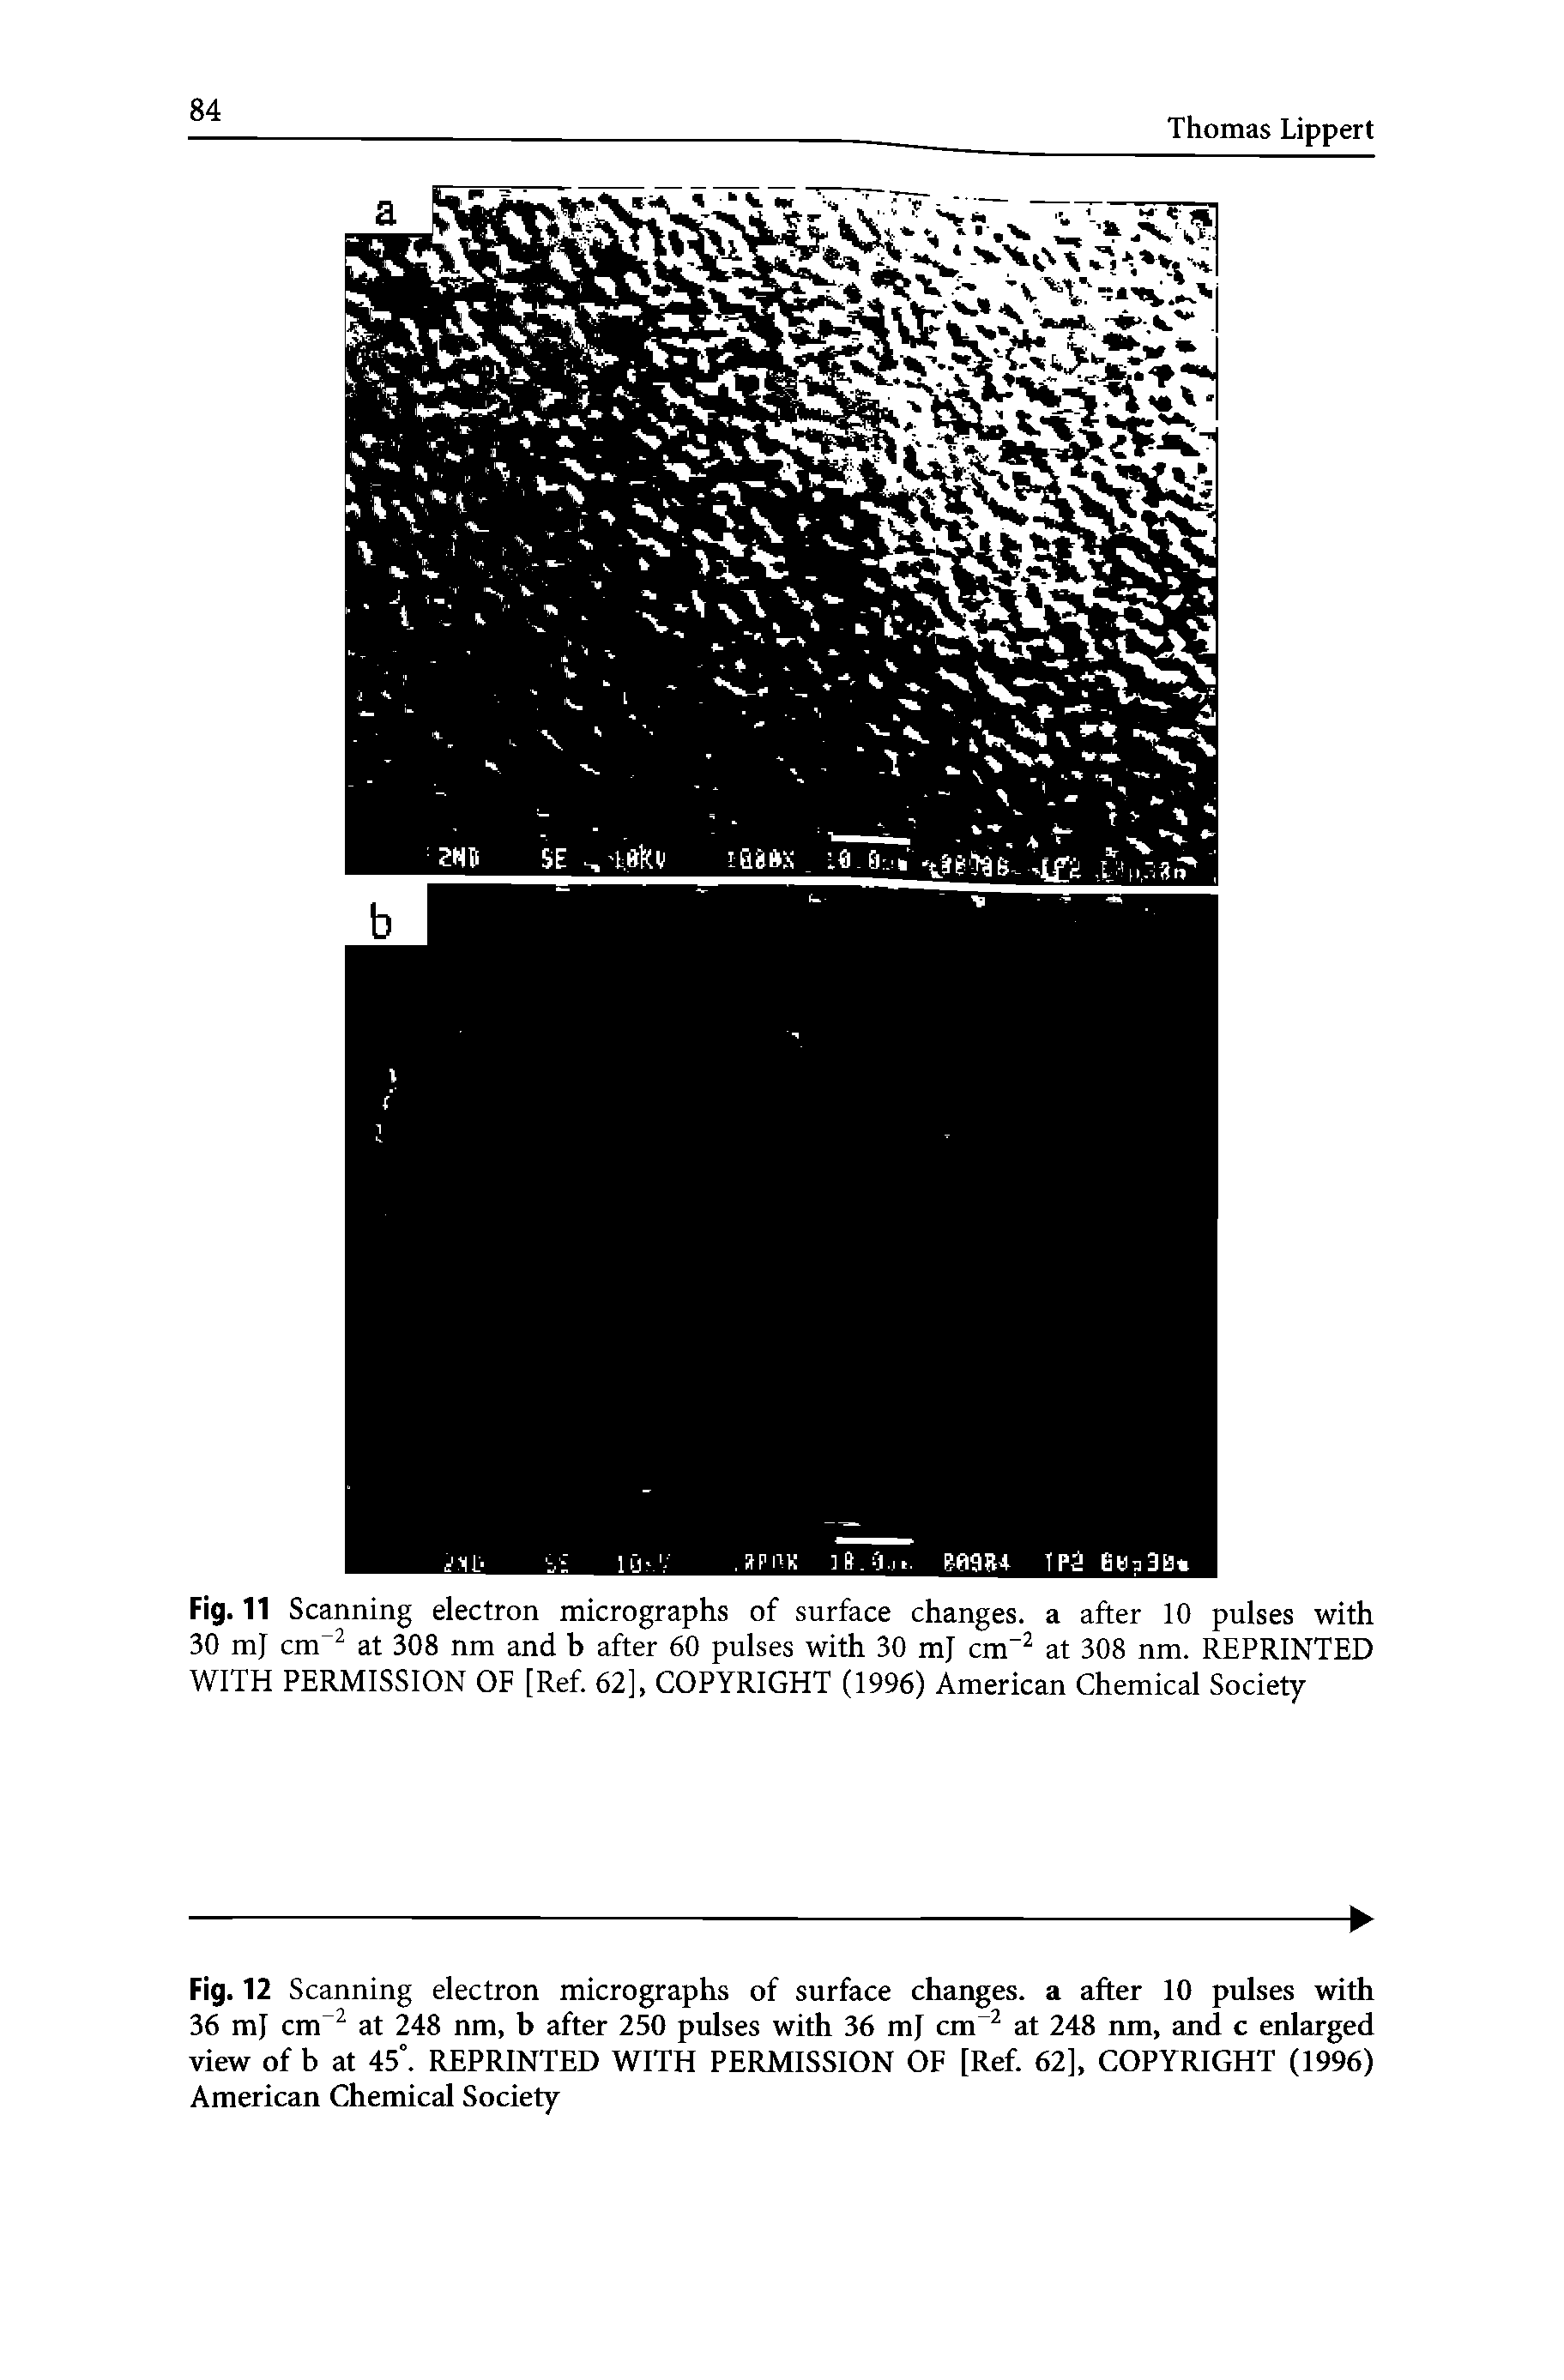 Fig. 11 Scanning electron micrographs of surface changes, a after 10 pulses with 30 mj cnT2 at 308 nm and b after 60 pulses with 30 mj cm-2 at 308 nm. REPRINTED WITH PERMISSION OF [Ref. 62], COPYRIGHT (1996) American Chemical Society...